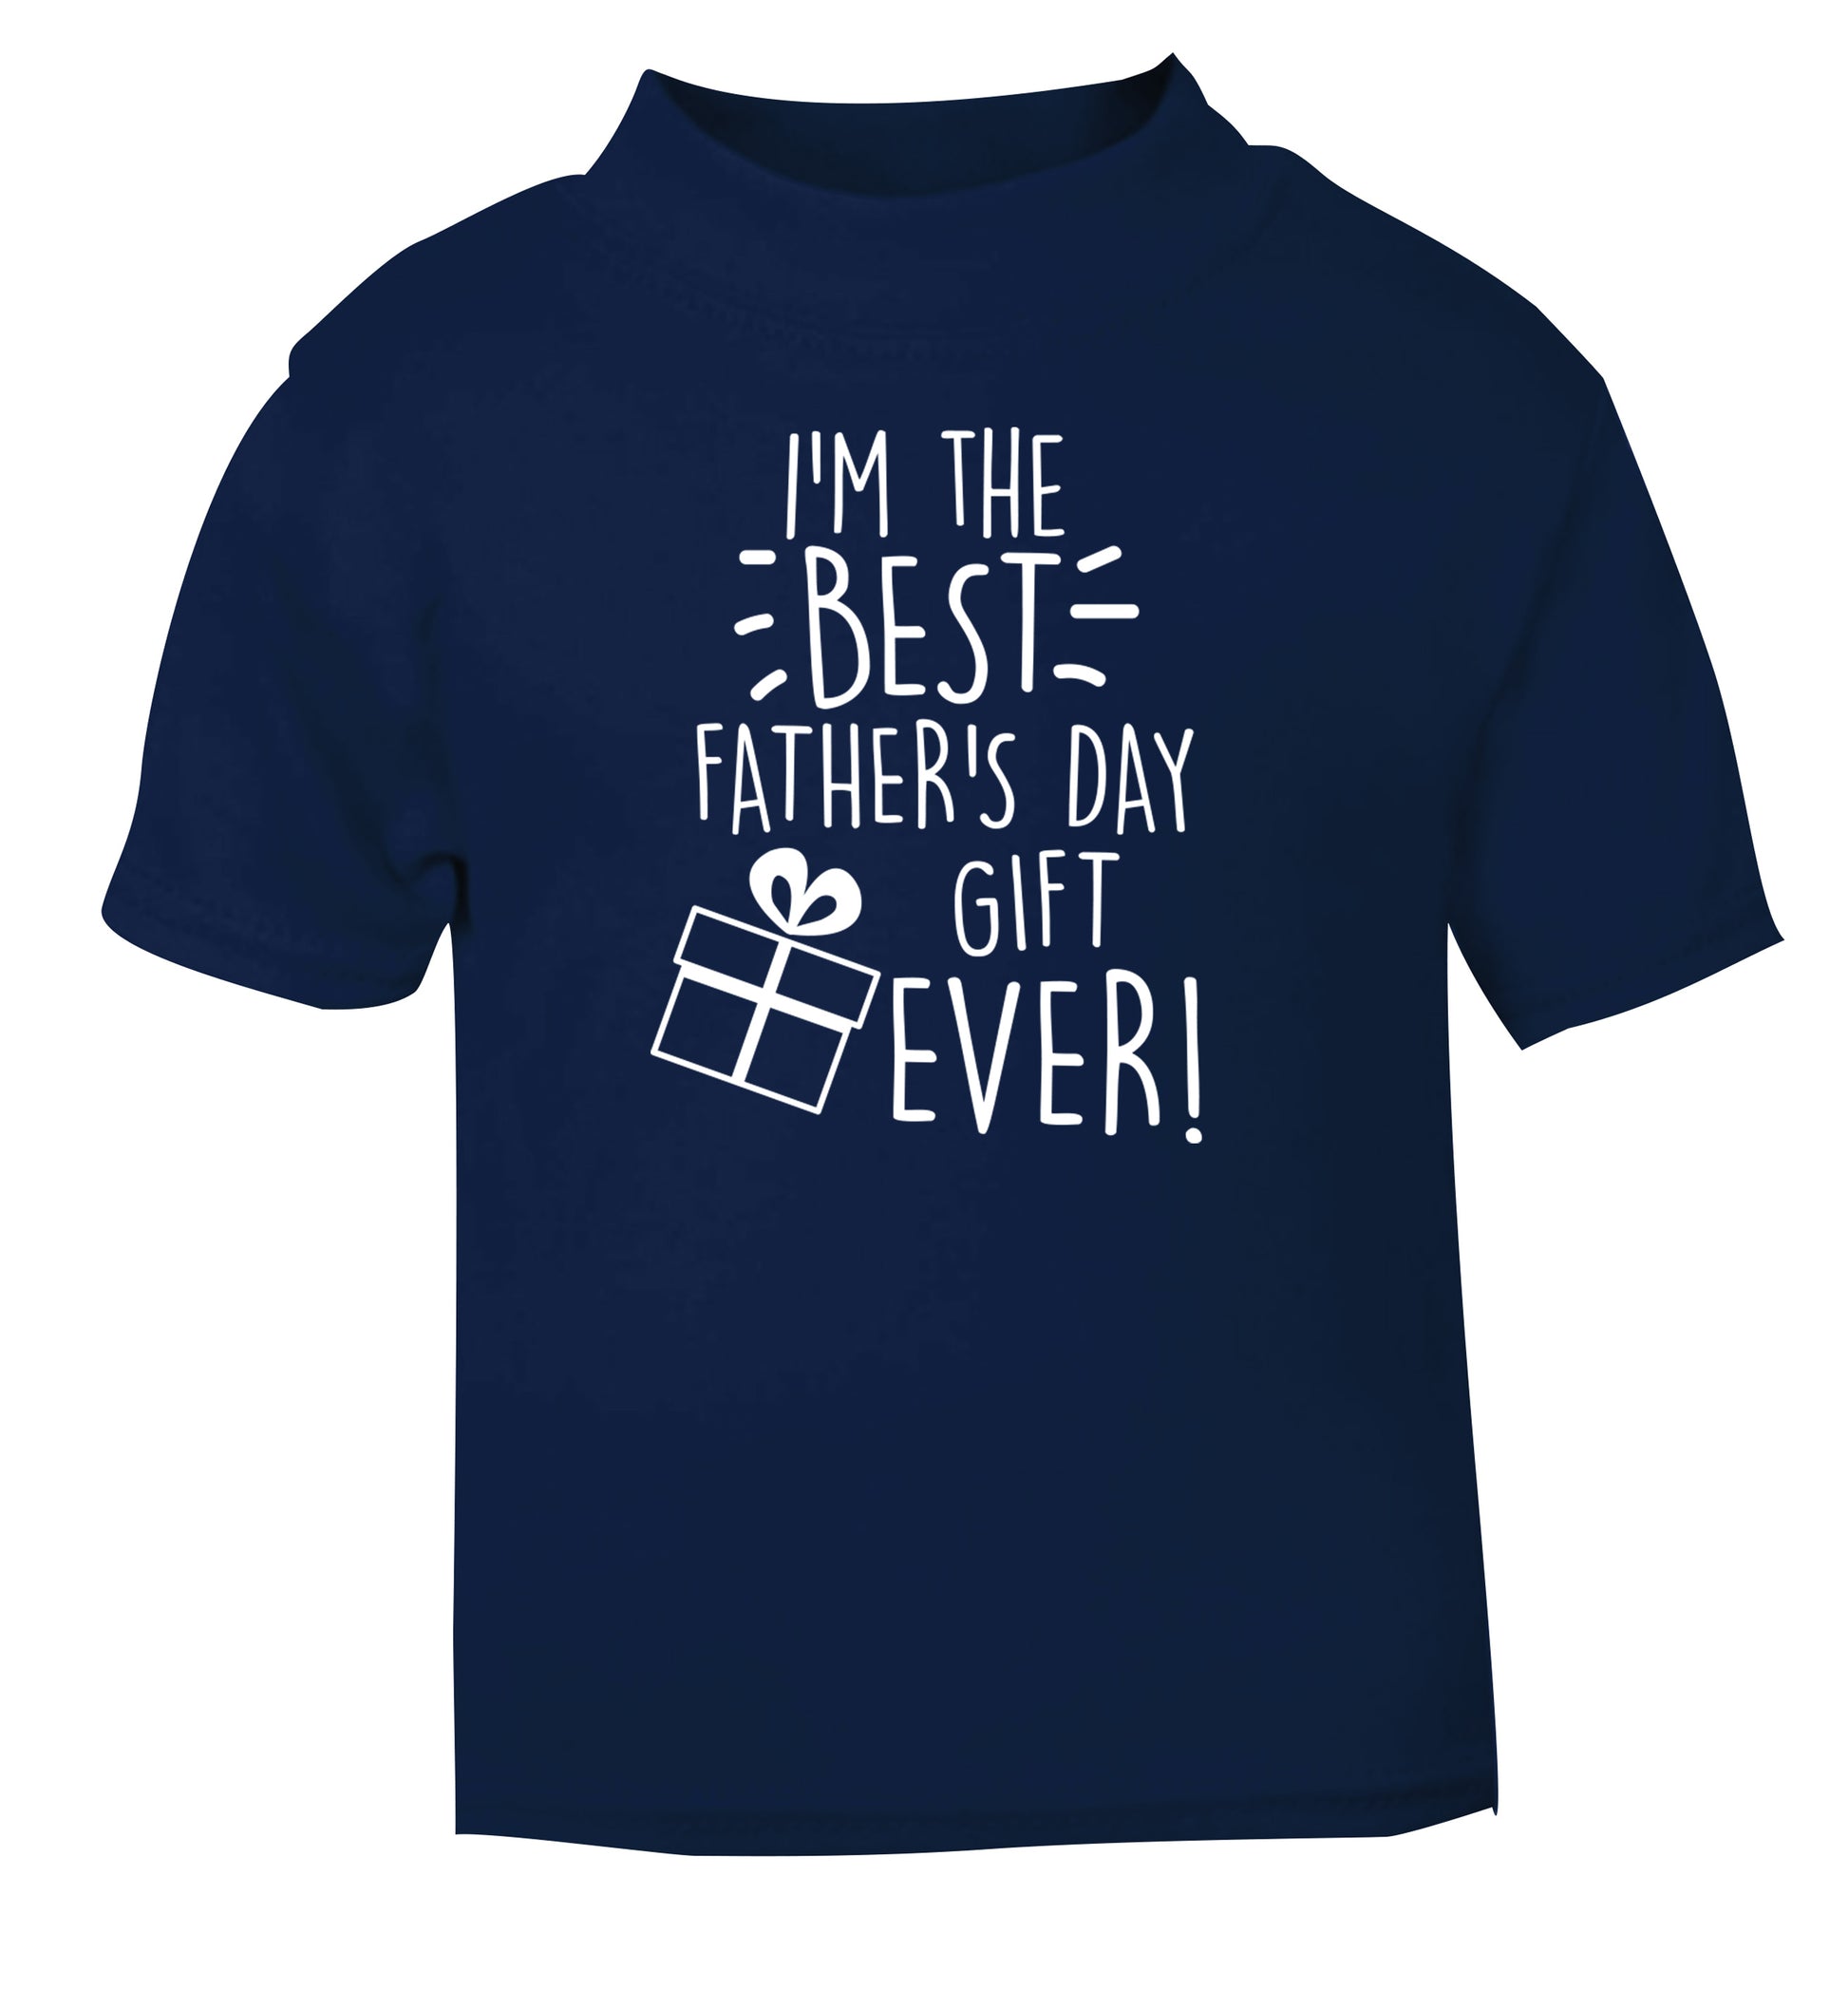 I'm the BEST father's day gift ever! navy Baby Toddler Tshirt 2 Years